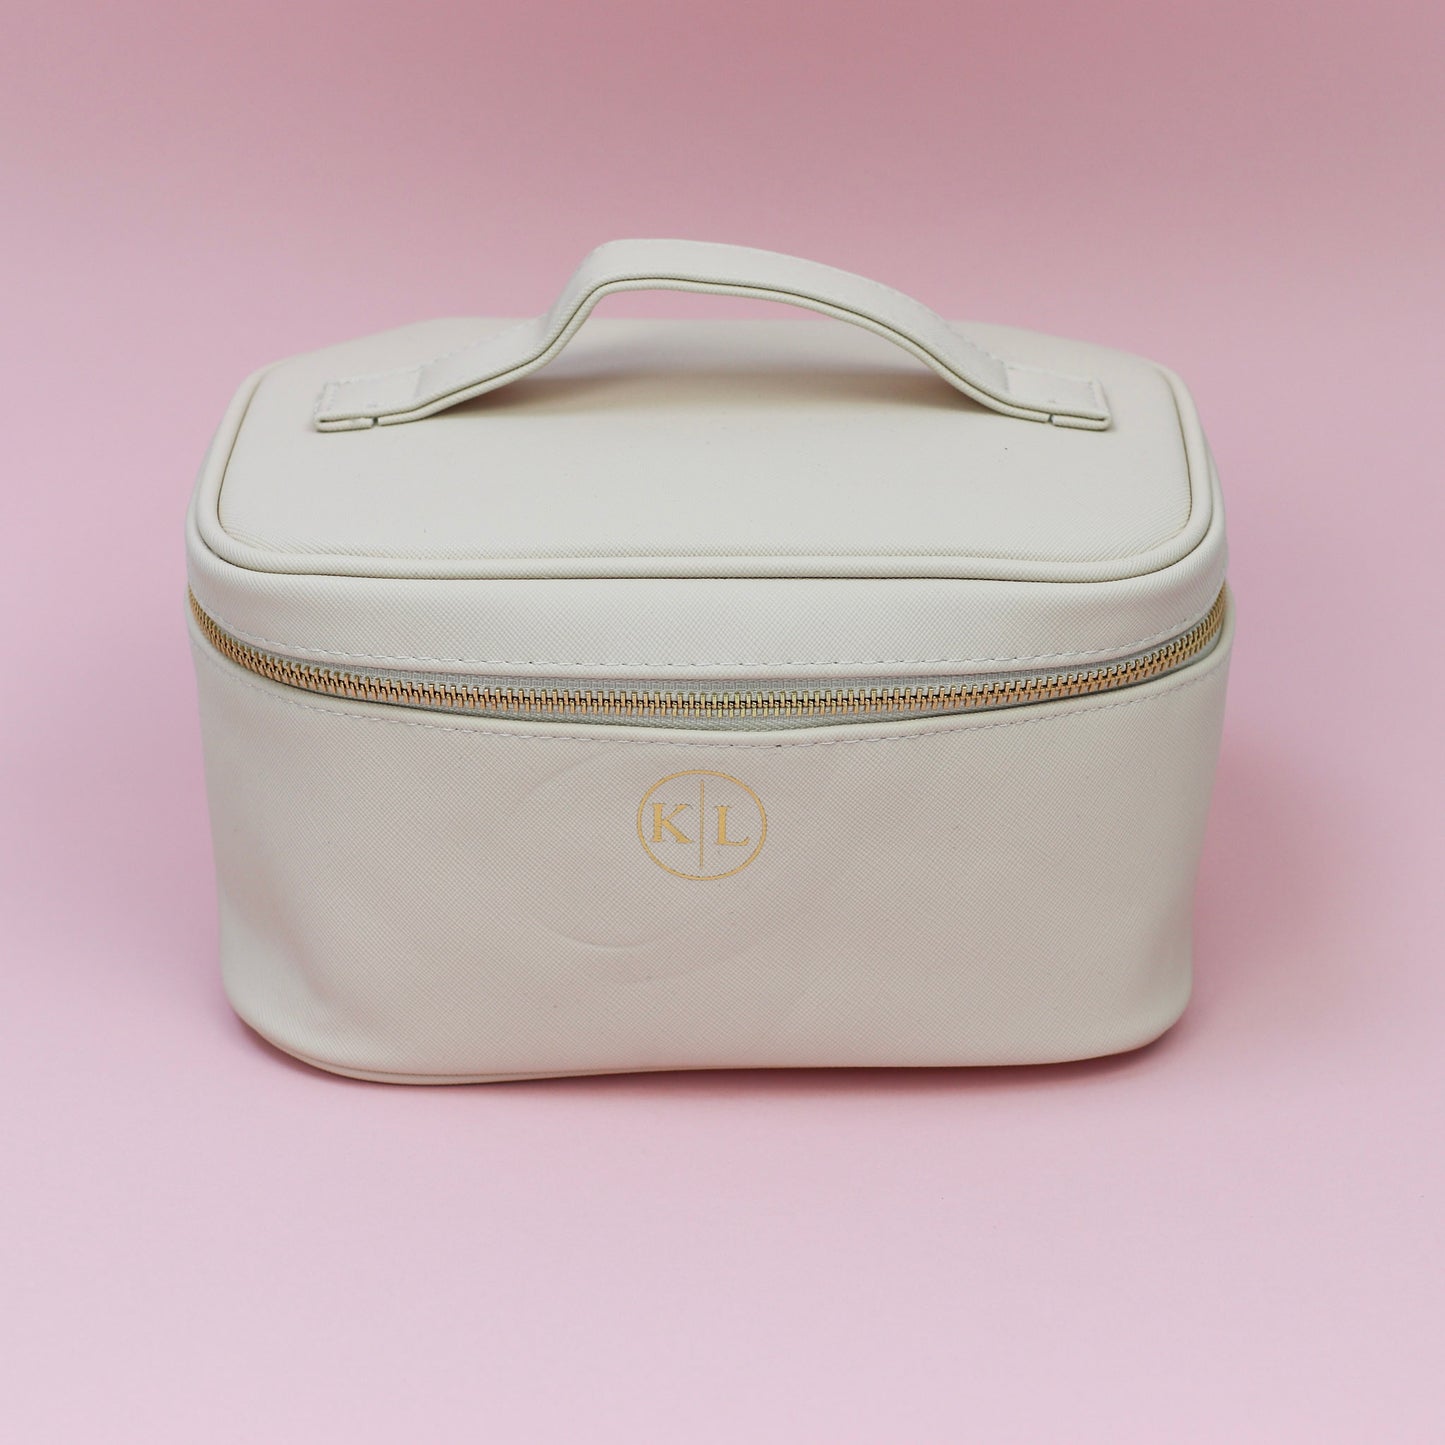 Circle Initial Personalised Boutique Vanity Case